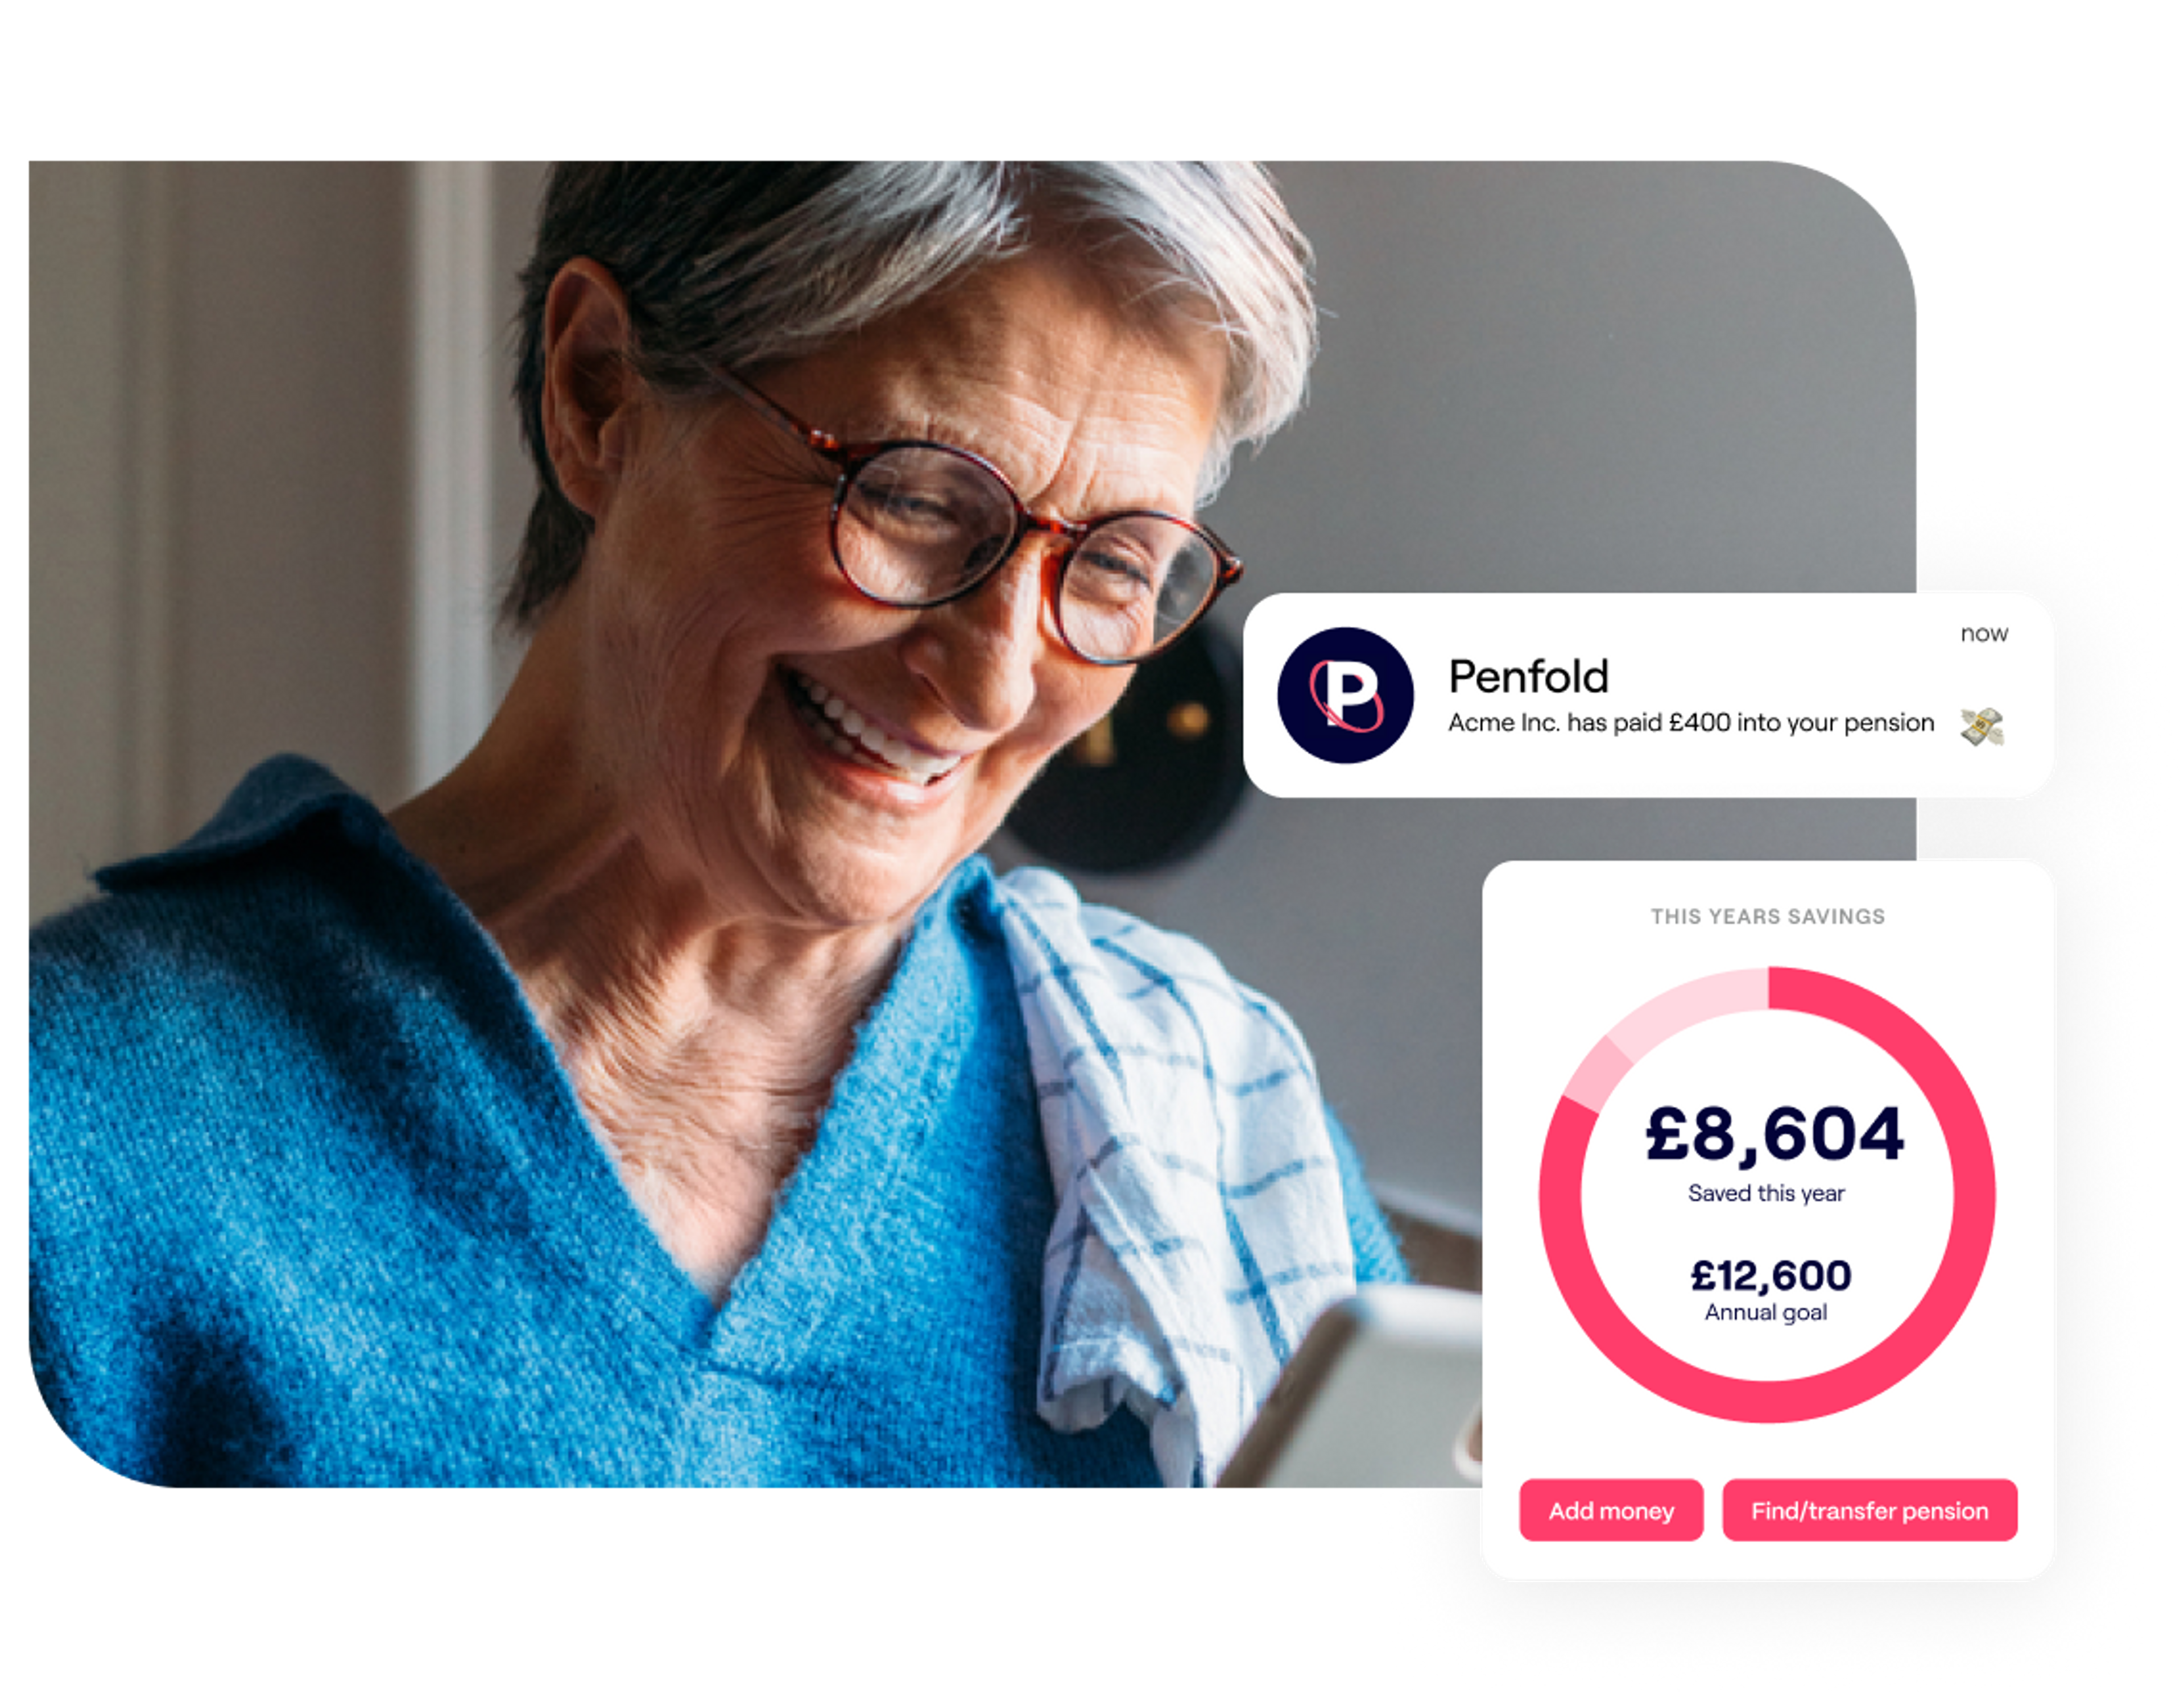 A photo of a woman smiling while looking at a laptop and excerpts of the Penfold pension app showing retirement savings and pension contributions screens